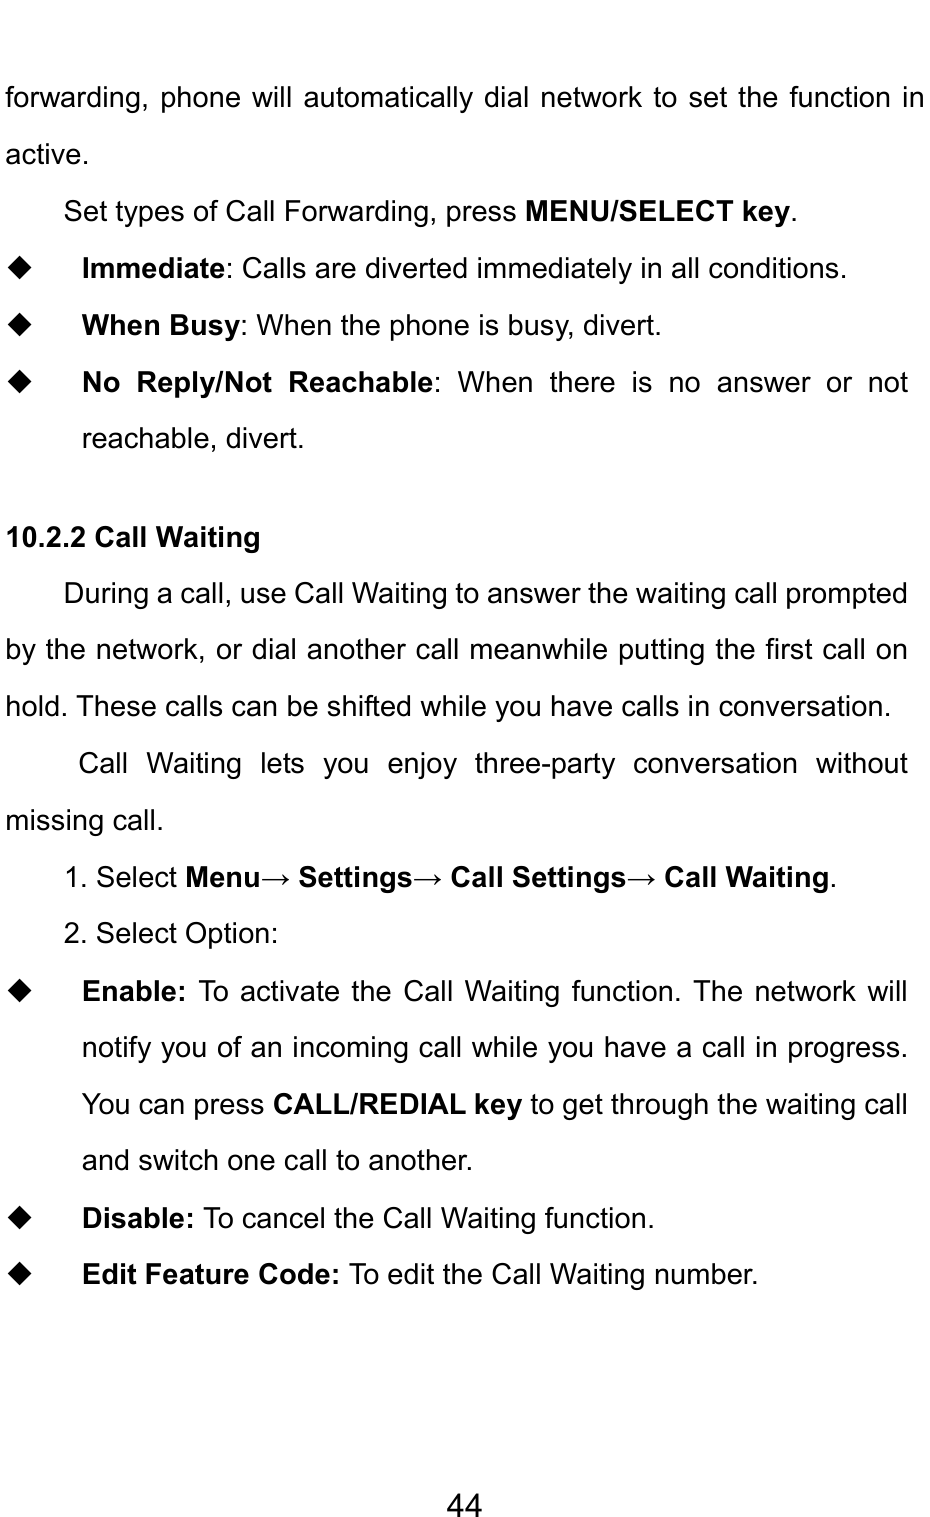                                     44forwarding, phone will automatically dial network to set the function in active. Set types of Call Forwarding, press MENU/SELECT key.  Immediate: Calls are diverted immediately in all conditions.   When Busy: When the phone is busy, divert.  No Reply/Not Reachable: When there is no answer or not reachable, divert.  10.2.2 Call Waiting During a call, use Call Waiting to answer the waiting call prompted by the network, or dial another call meanwhile putting the first call on hold. These calls can be shifted while you have calls in conversation.  Call Waiting lets you enjoy three-party conversation without missing call. 1. Select Menu→ Settings→ Call Settings→ Call Waiting. 2. Select Option:  Enable:  To activate the Call Waiting function. The network will notify you of an incoming call while you have a call in progress. You can press CALL/REDIAL key to get through the waiting call and switch one call to another.  Disable: To cancel the Call Waiting function.  Edit Feature Code: To edit the Call Waiting number.  